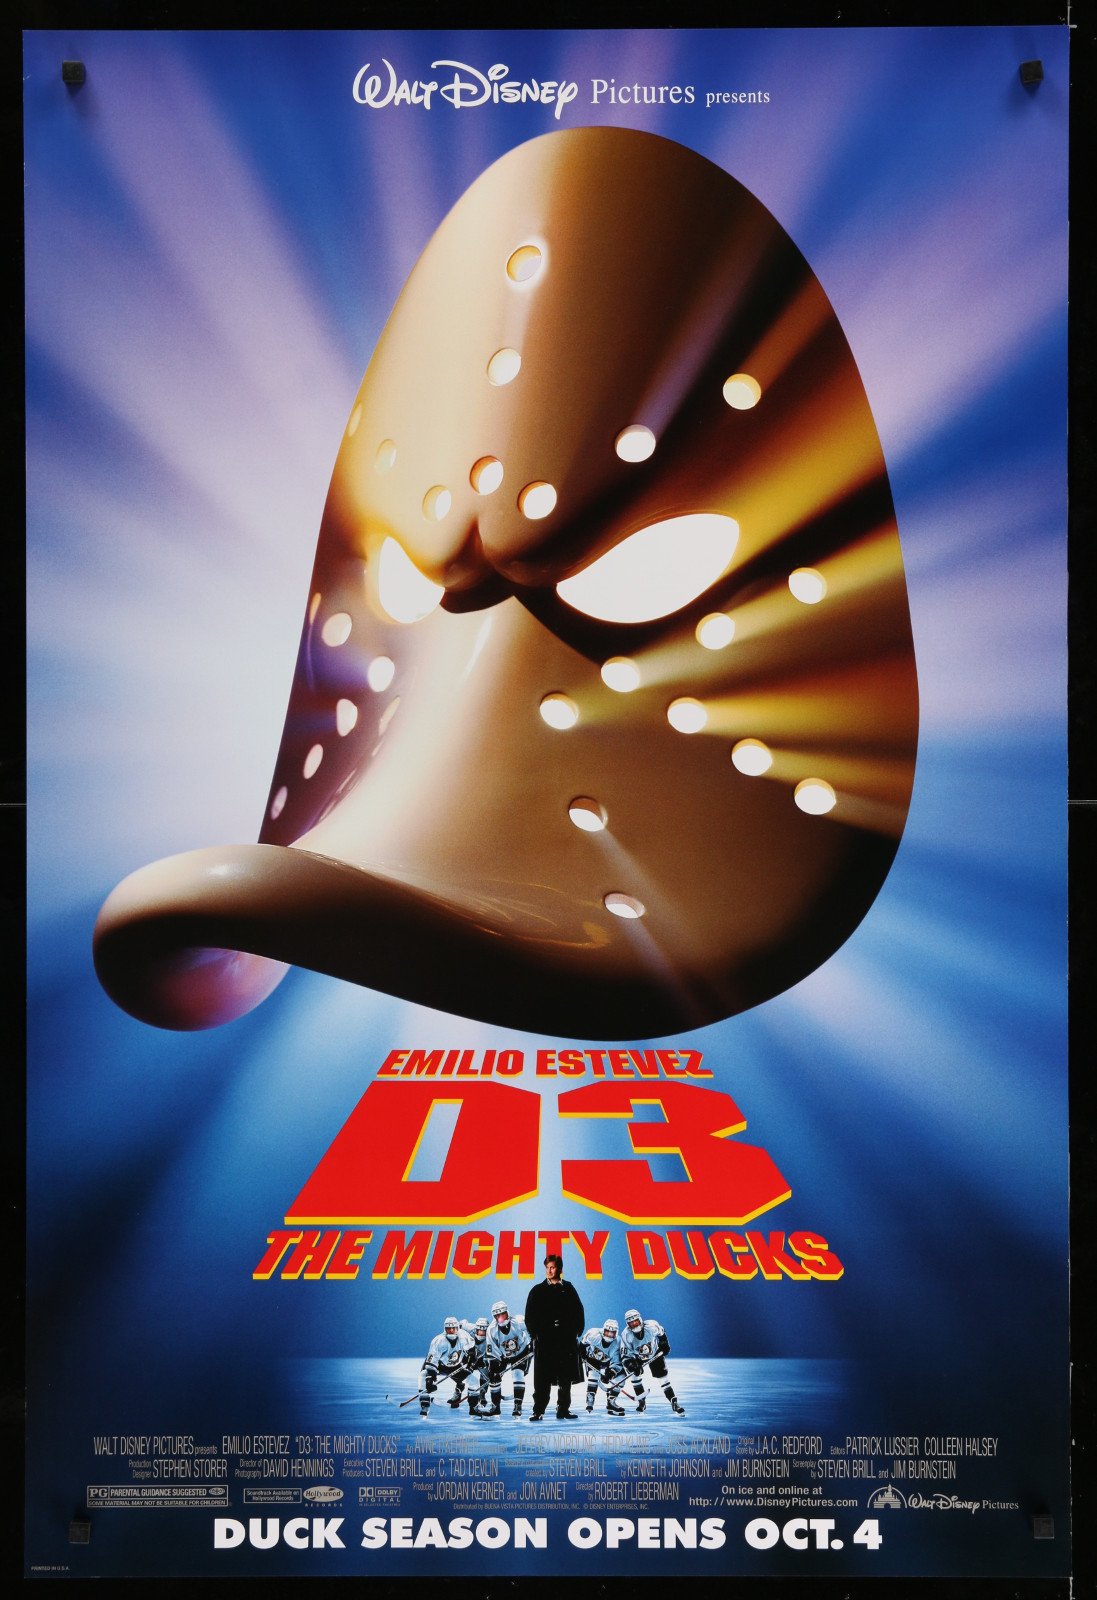 The Mighty Ducks 3 2A366 A Part Of A Lot 29 Unfolded Double-Sided 27X40 One-Sheets '90S-00S Great Movie Images!